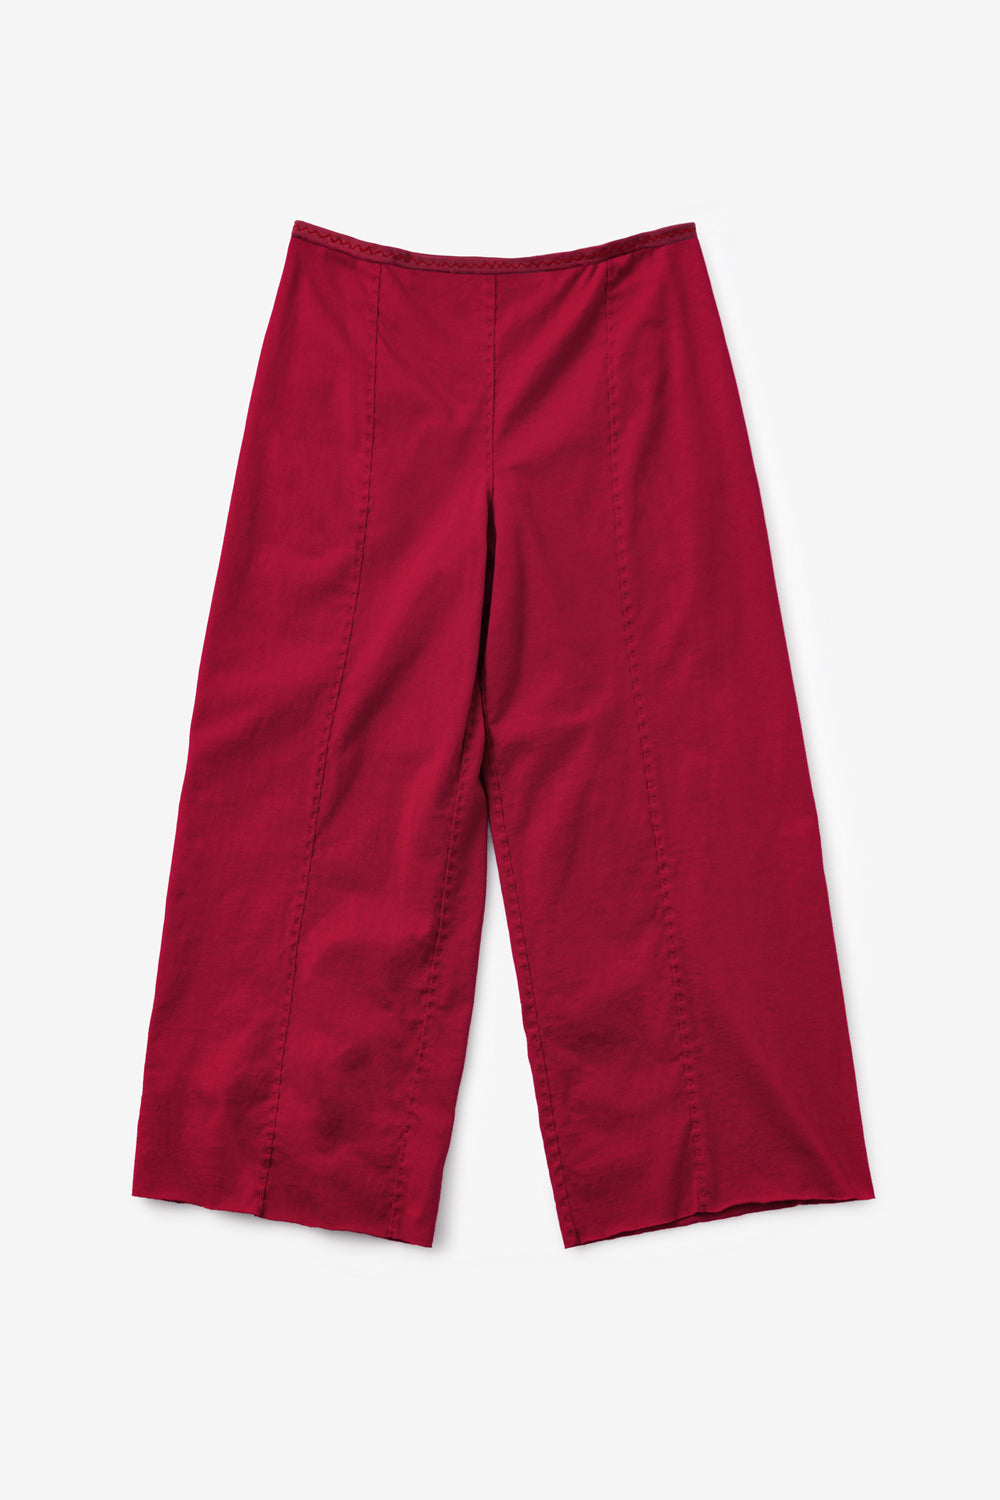 The Crop Pant in Carmine.